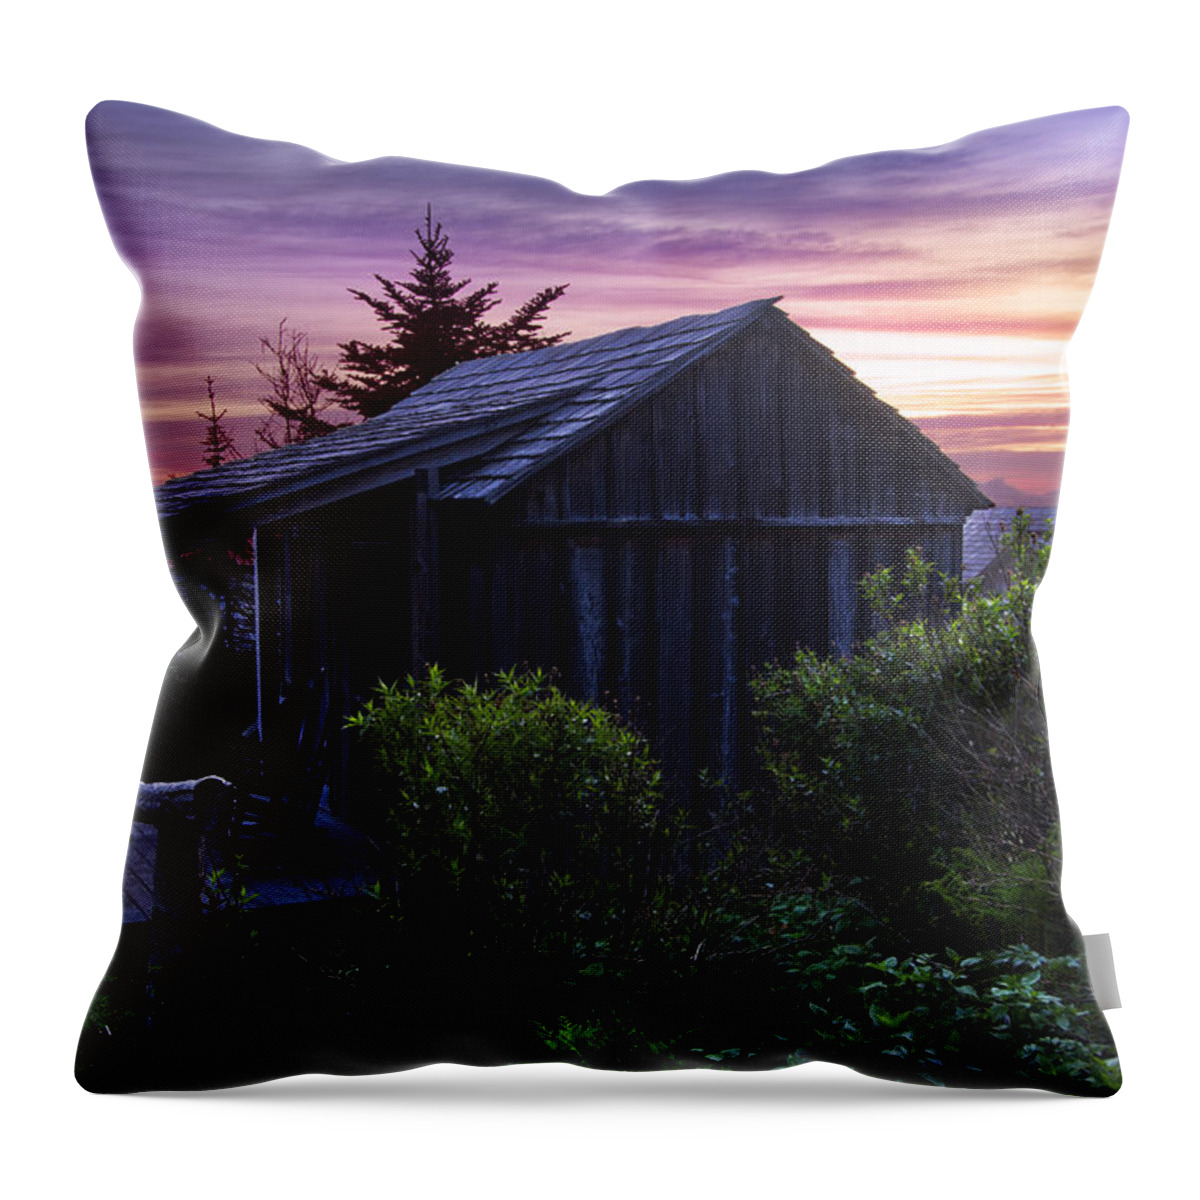 American Throw Pillow featuring the photograph Pink Dawn by Debra and Dave Vanderlaan